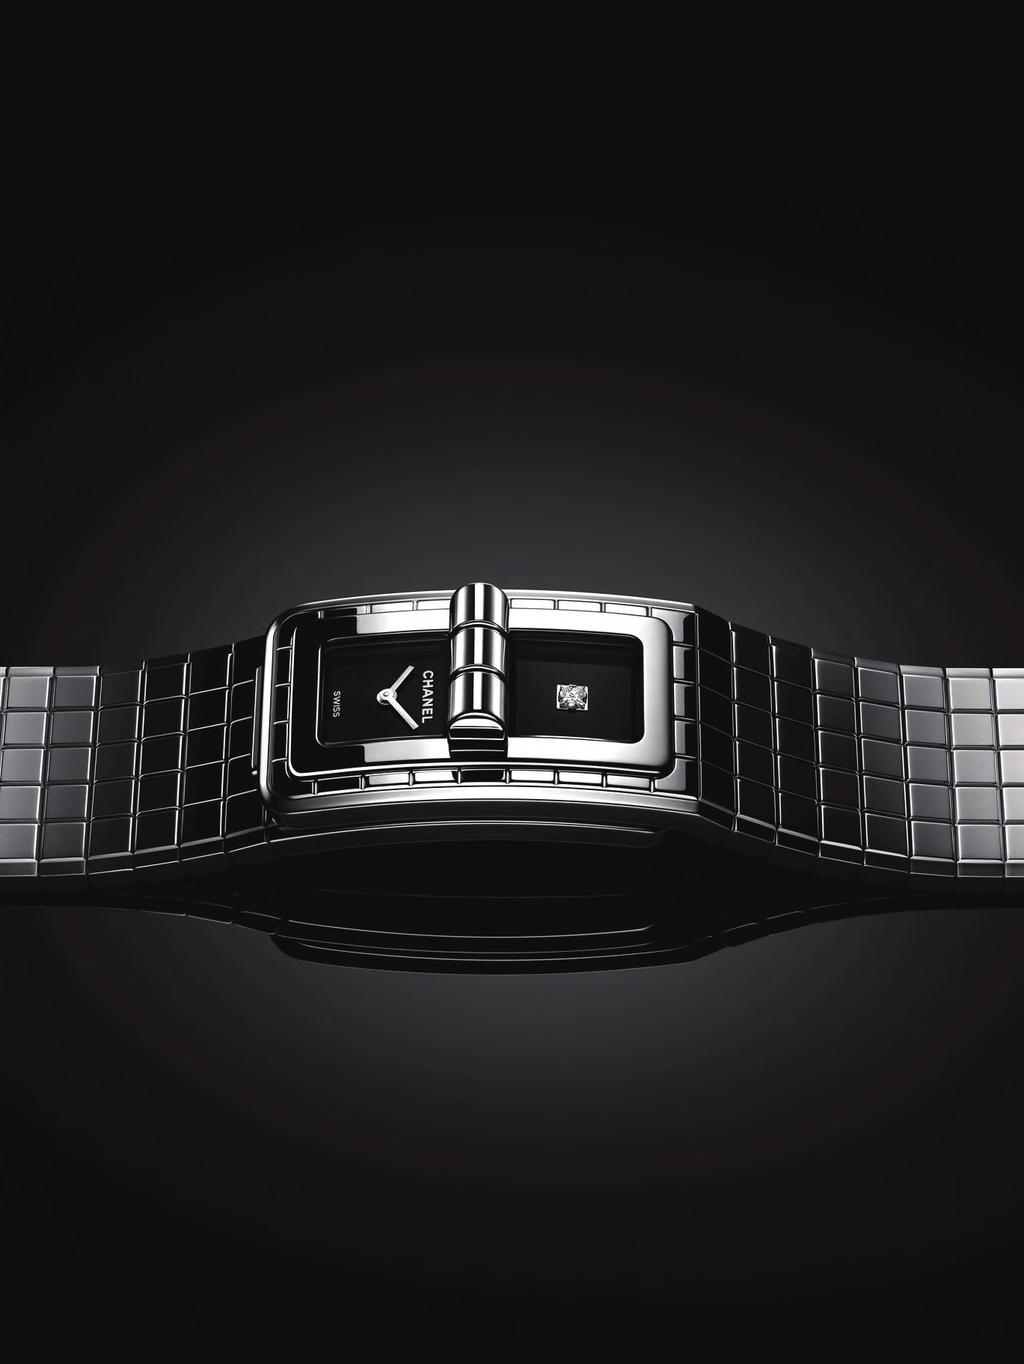 The new CODE COCO de CHANEL A veritable jewellery watch, the CODE COCO de CHANEL watch is distinguished by its supple, lightweight, sparkling quilted bracelet that seals with a click.